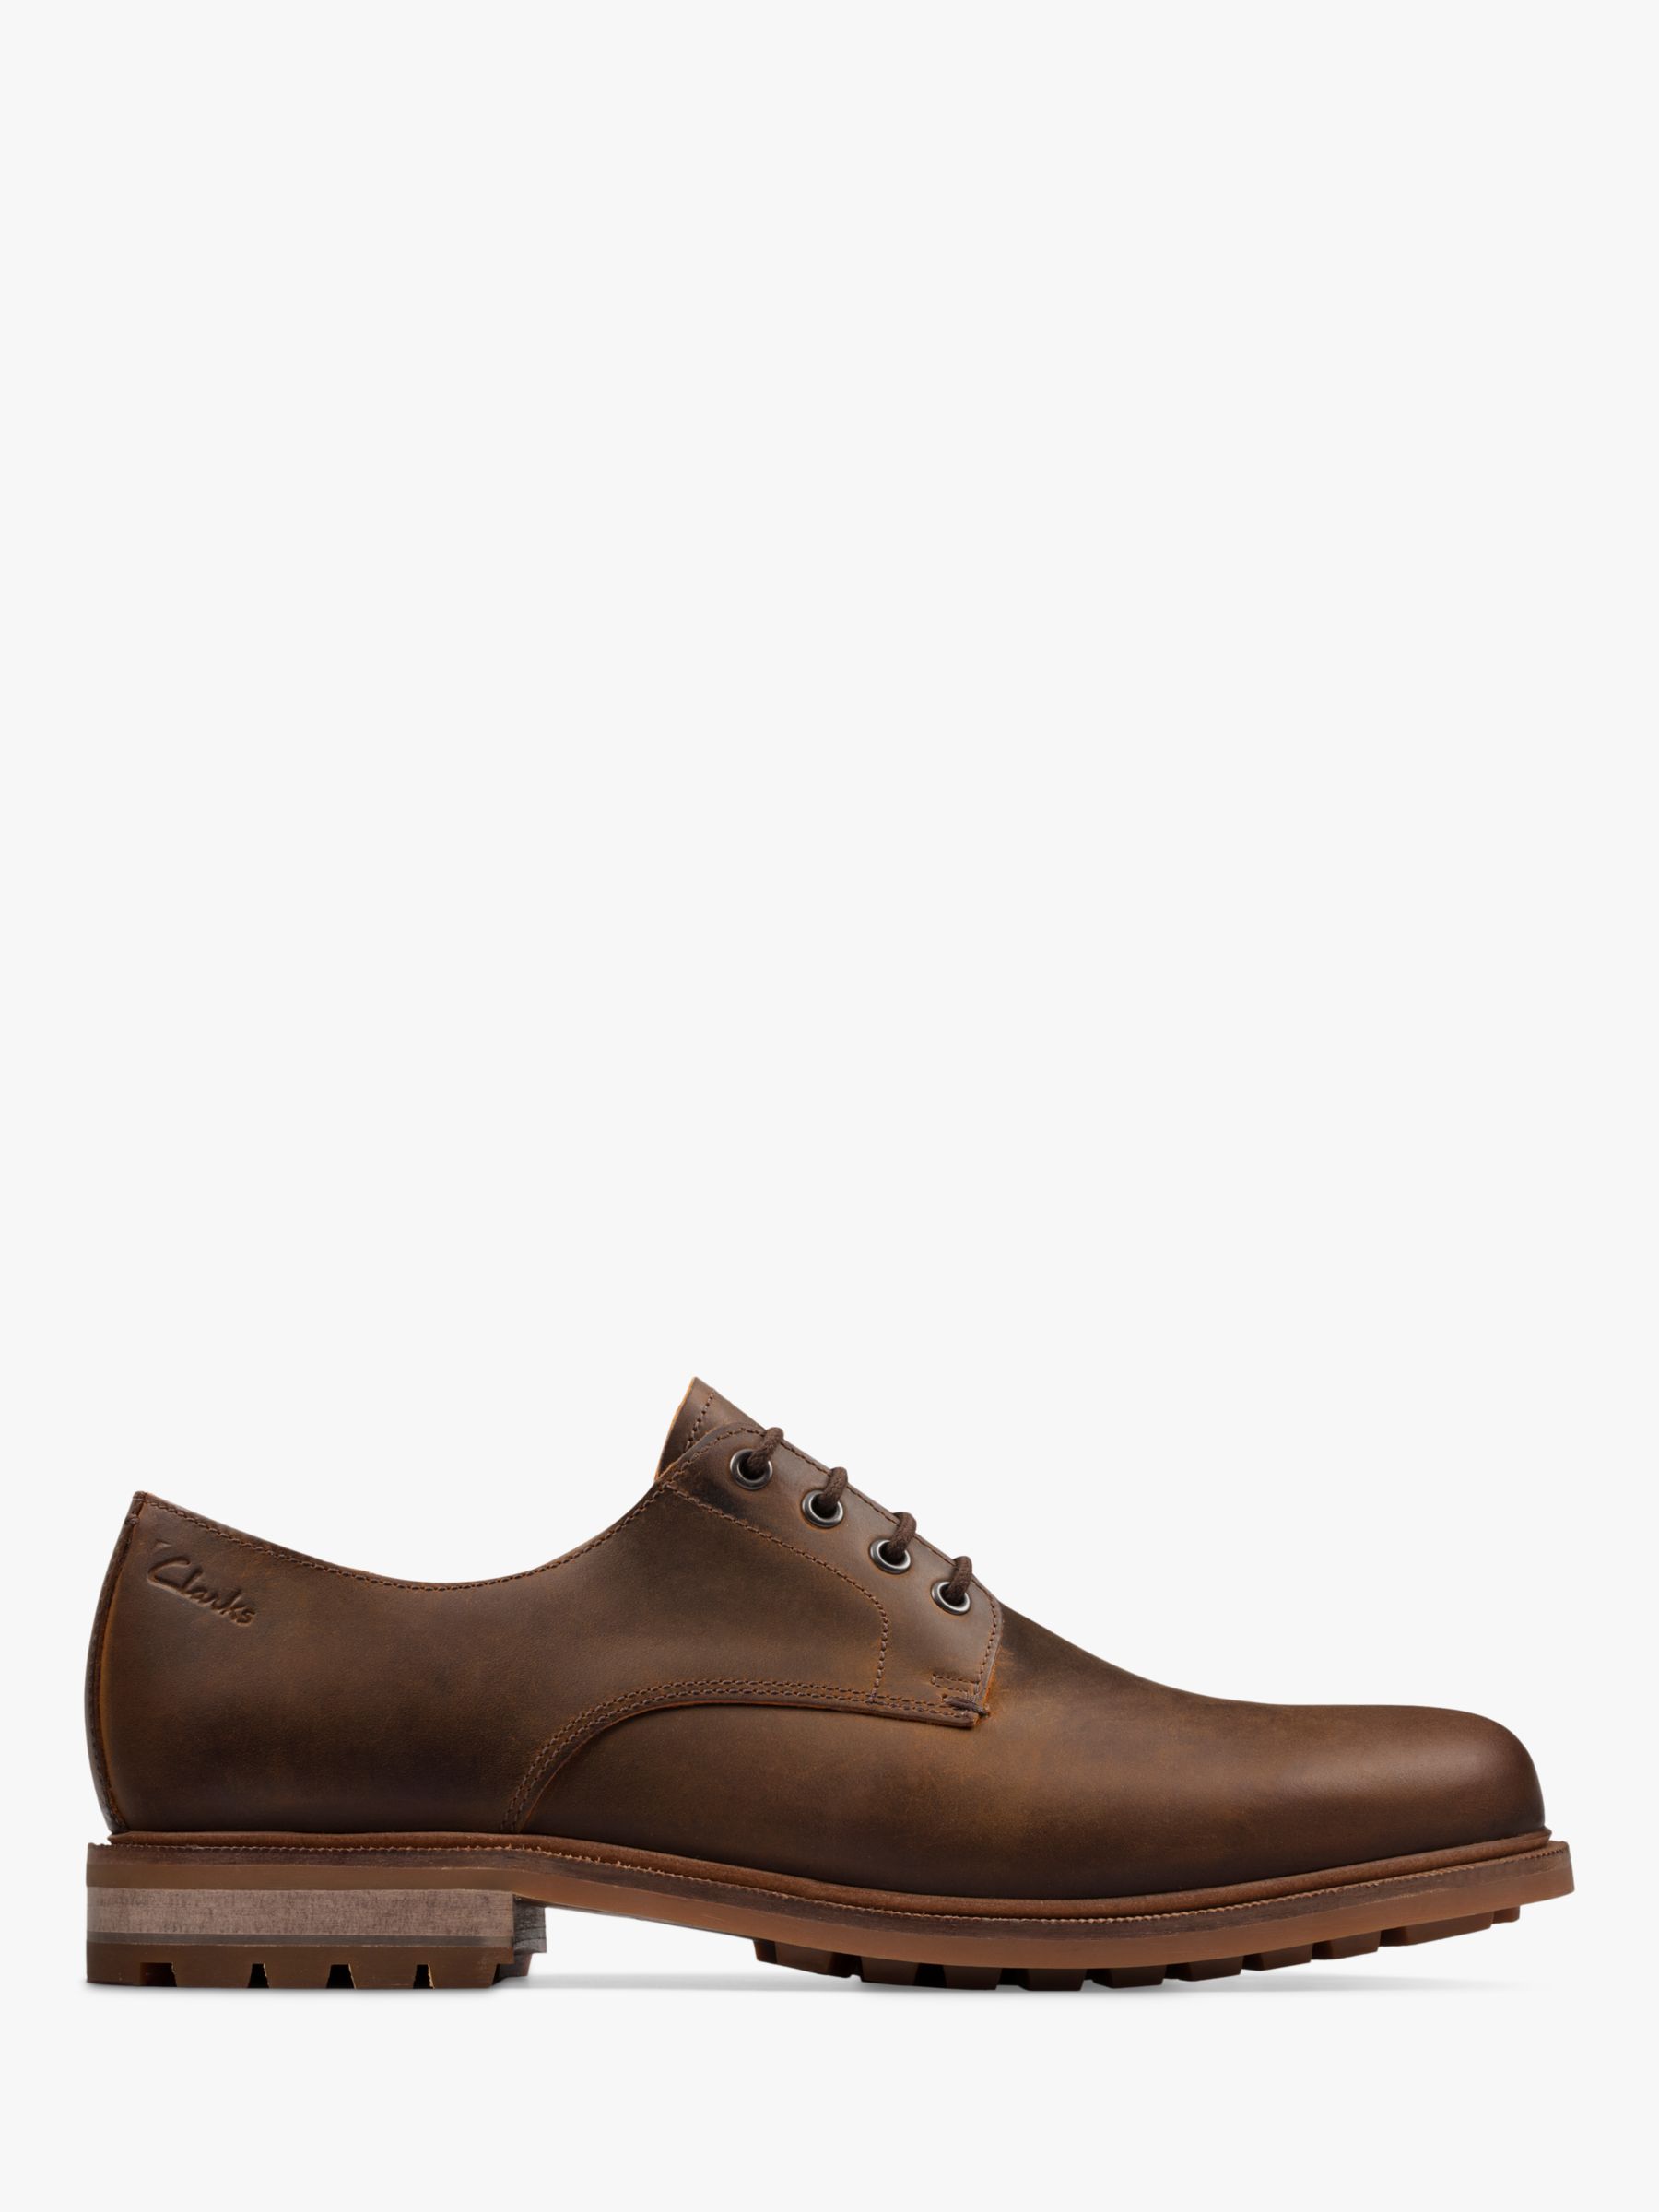 Clarks Foxwell Hall Leather Shoes, Beeswax